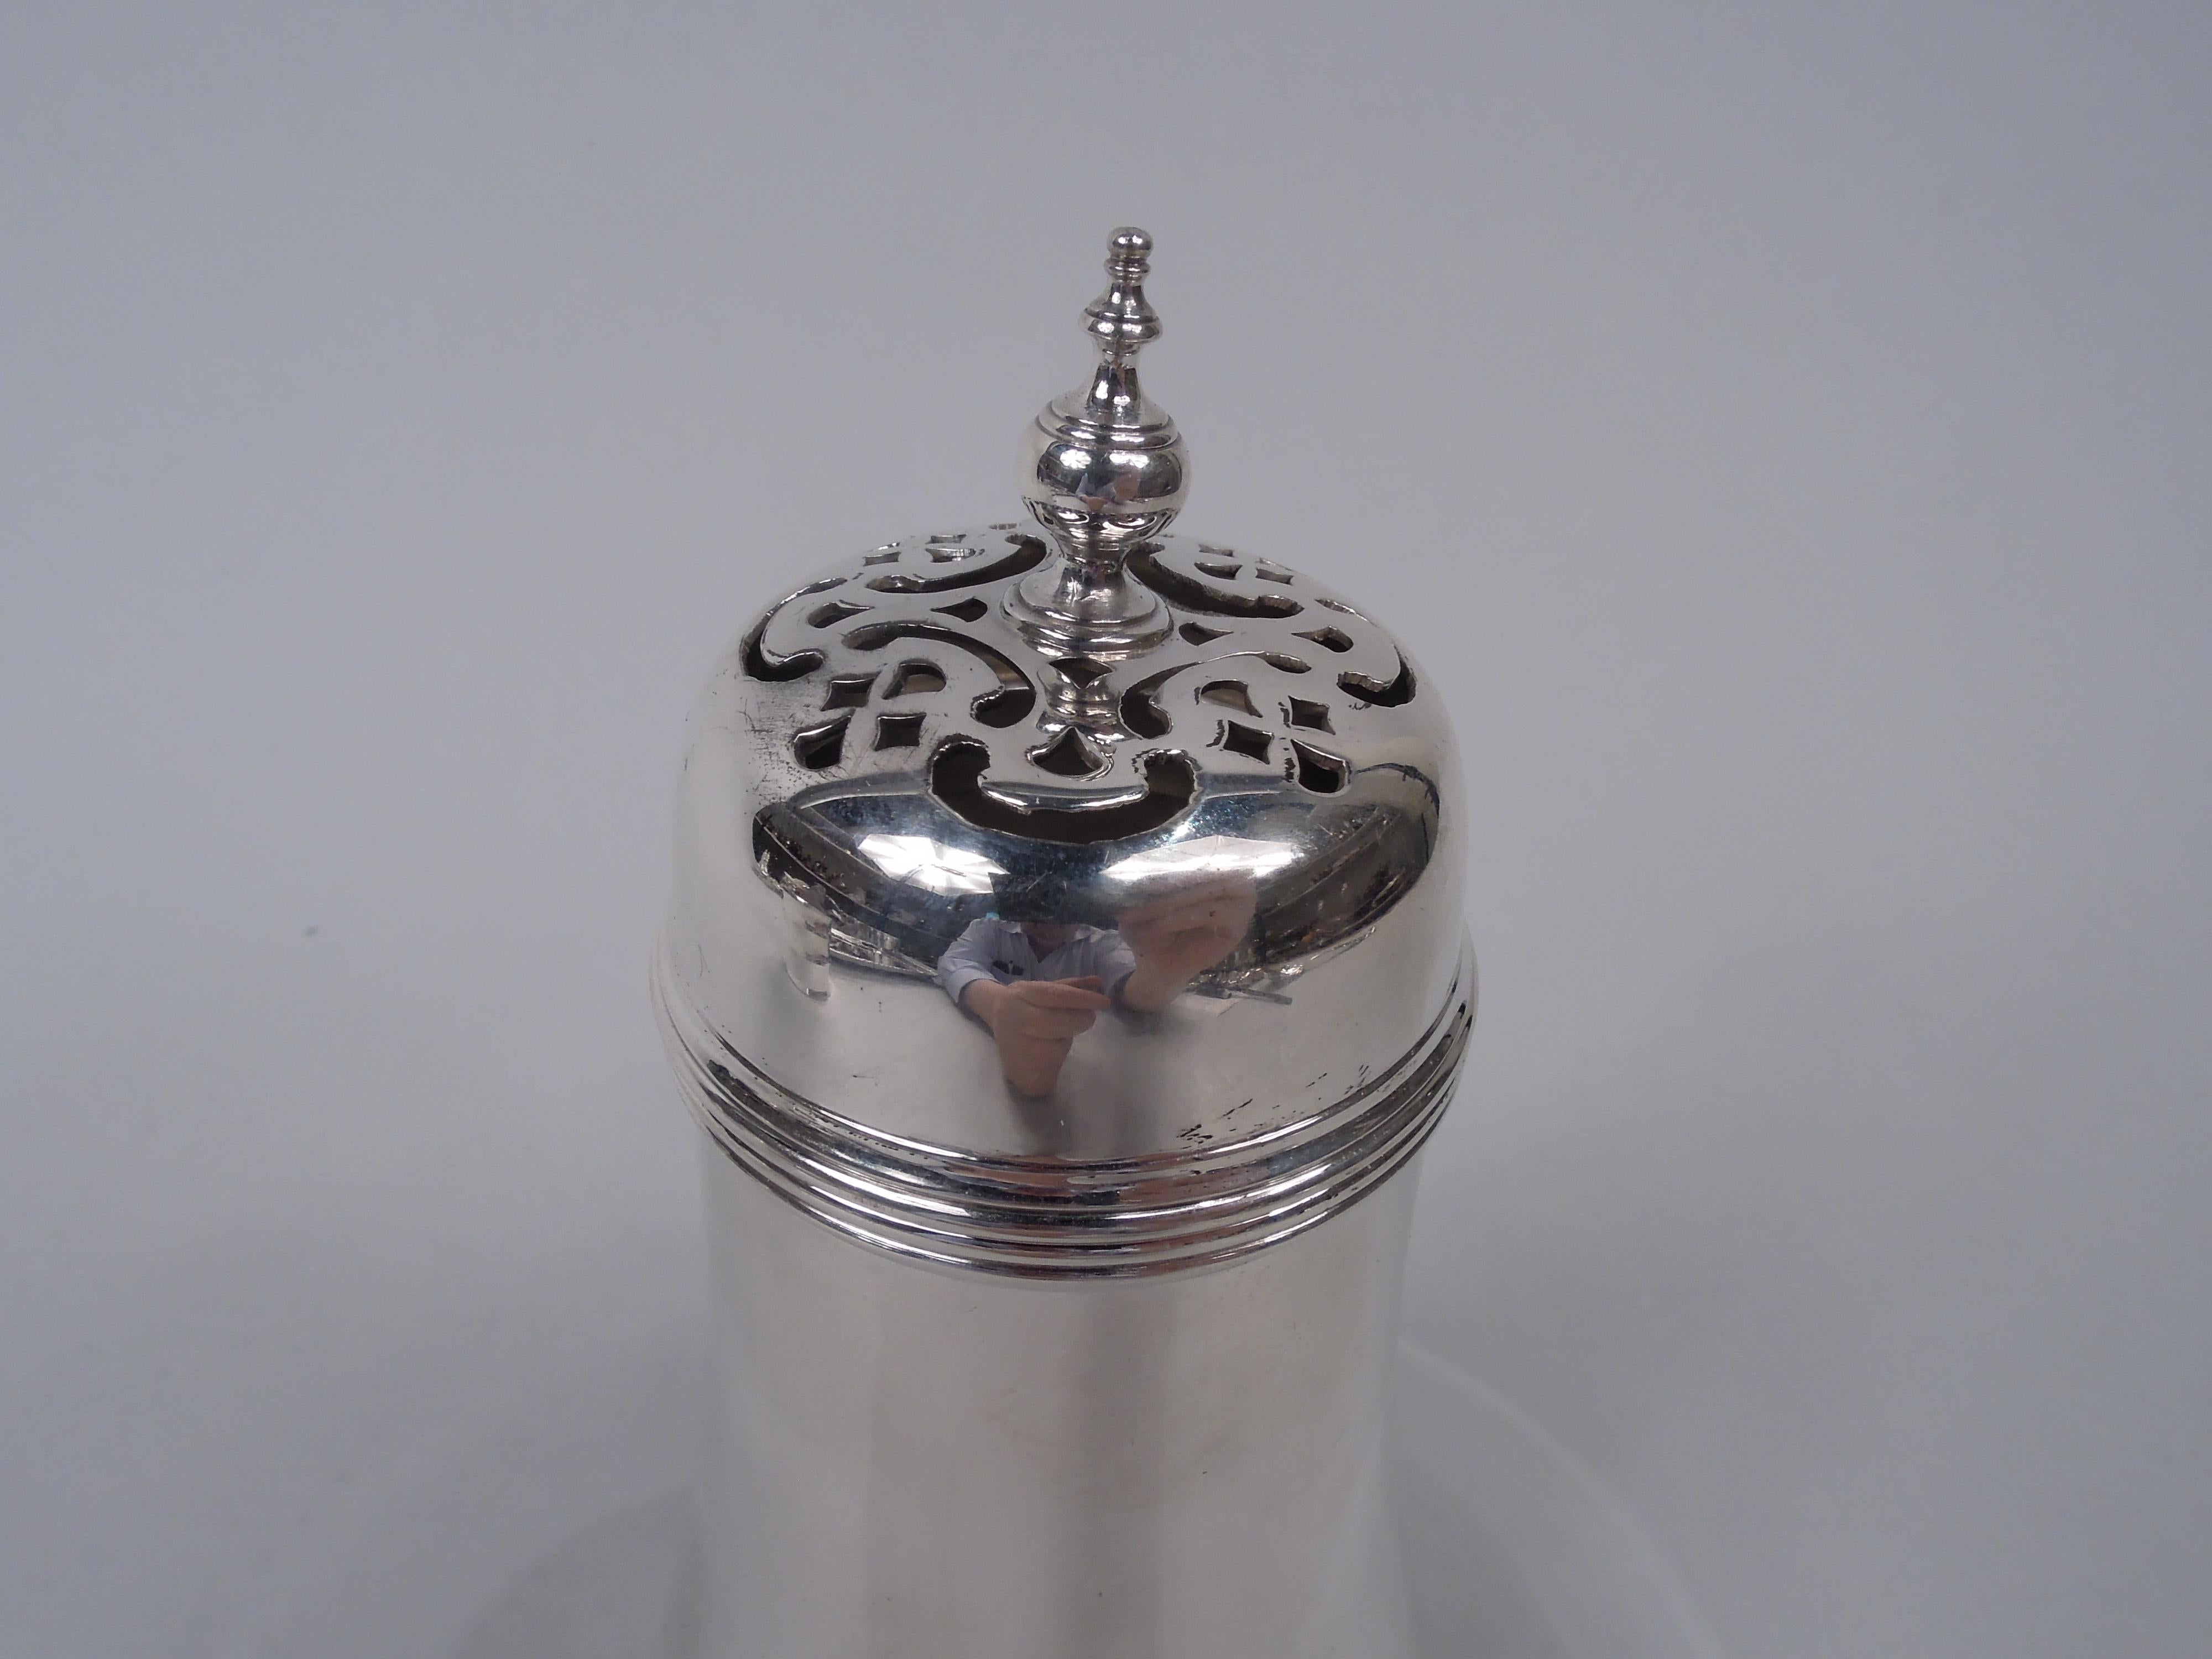 Edwardian Classical sterling silver sugar caster. Made by Tiffany & Co. in New York, ca 1909. Upward tapering bowl with reeding; stepped and spread foot. Cover domed with vasiform finial; top has ornamental piercing. Fully marked including maker’s